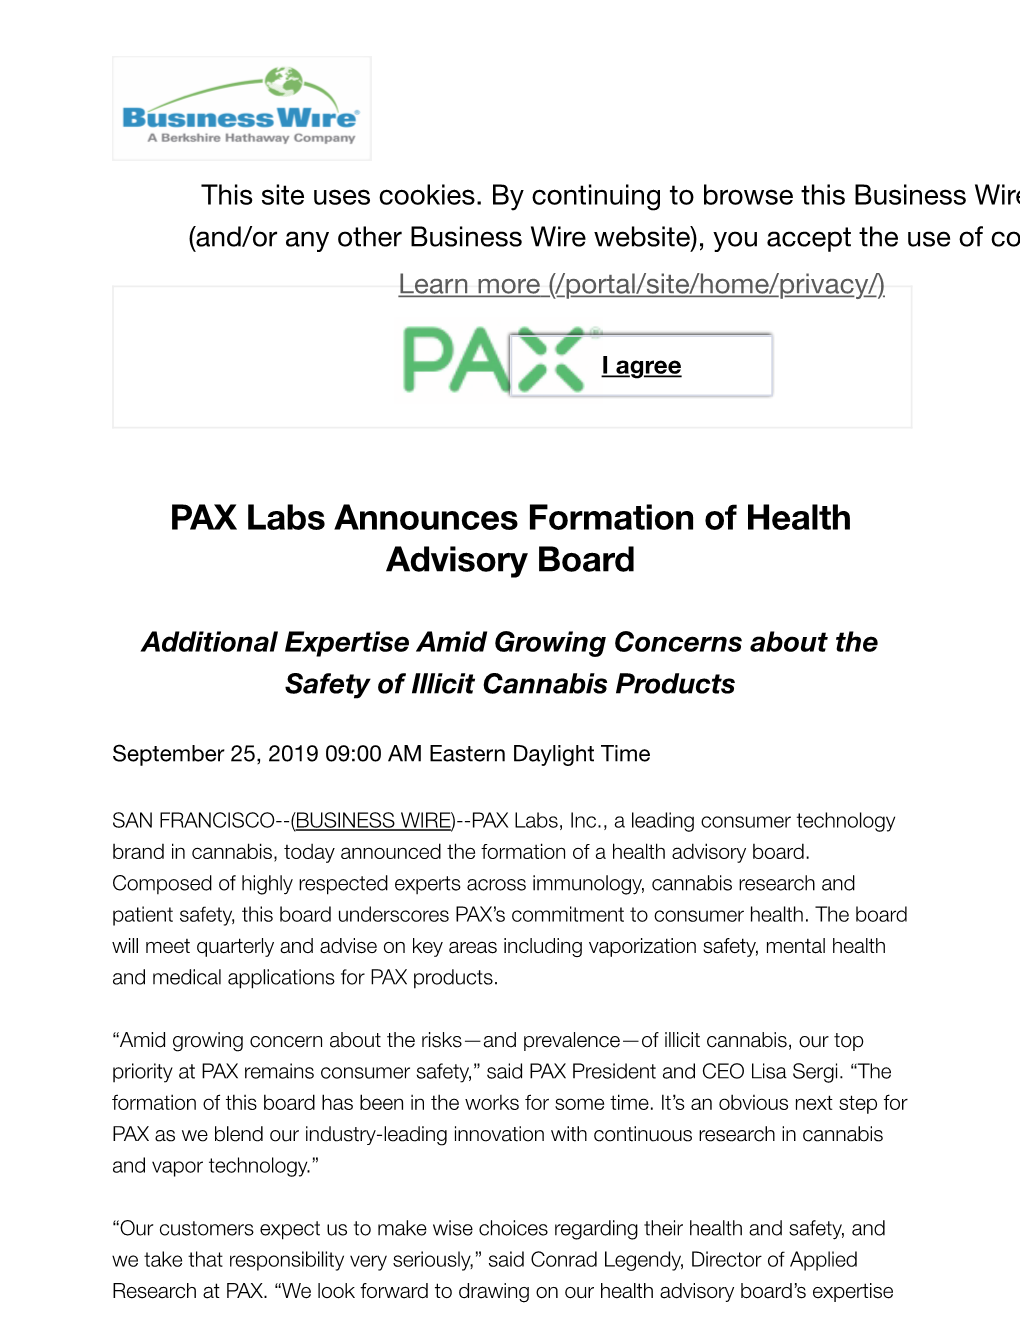 PAX Labs Announces Formation of Health Advisory Board